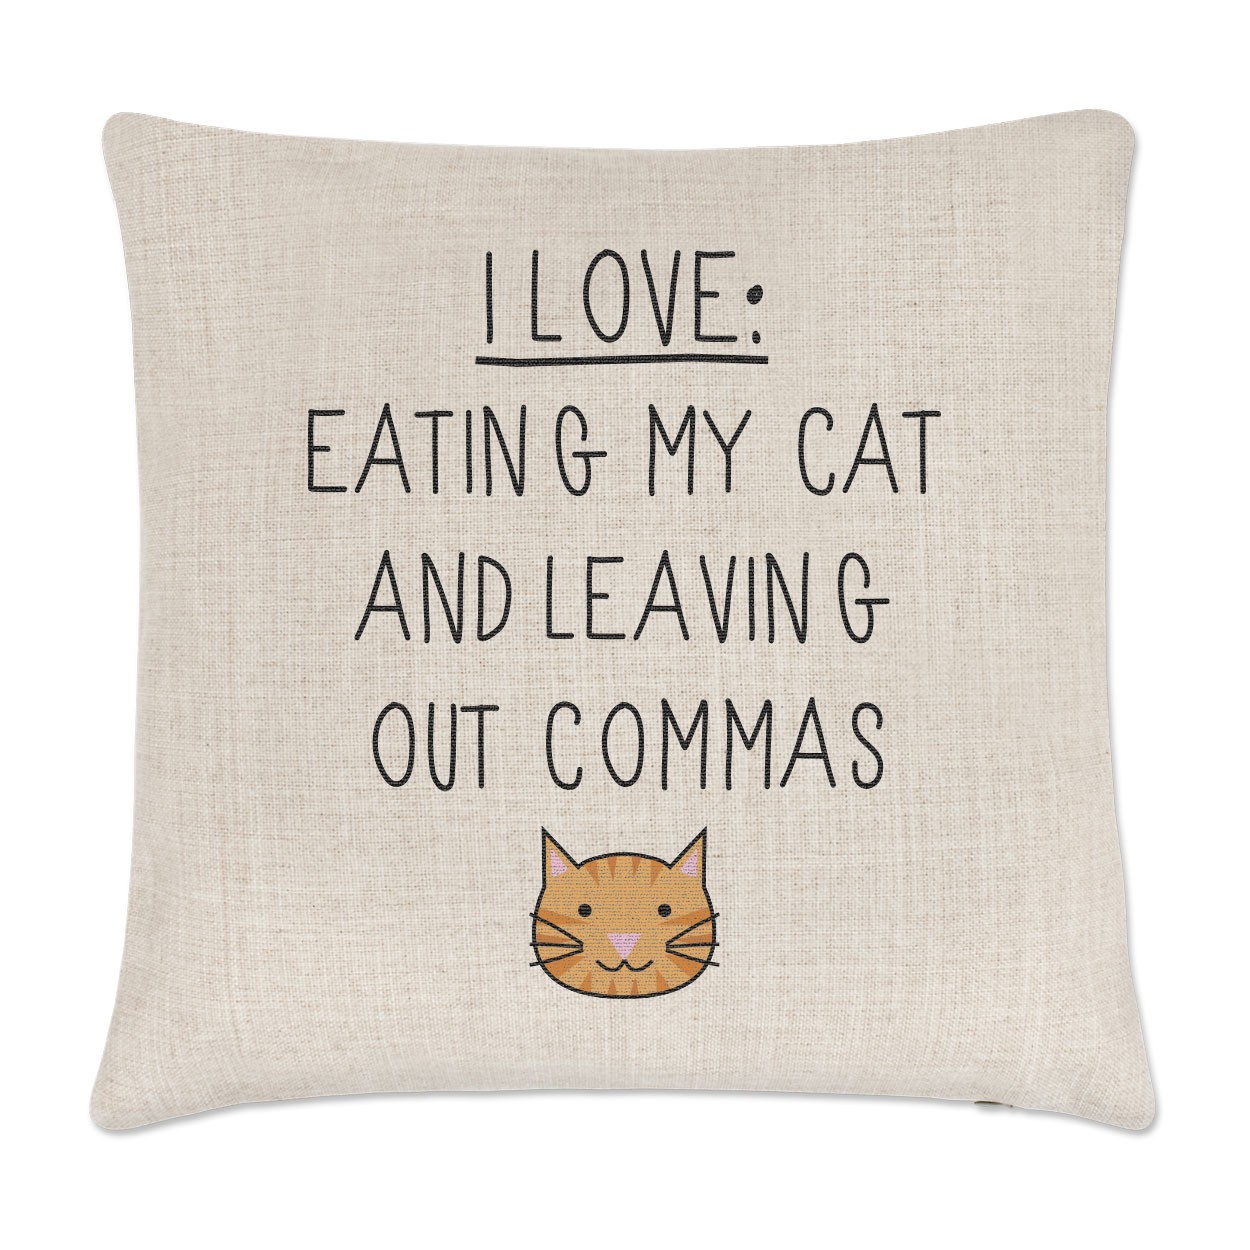 I Love Eating My Cat and Leaving Out Commas Linen Cushion Cover